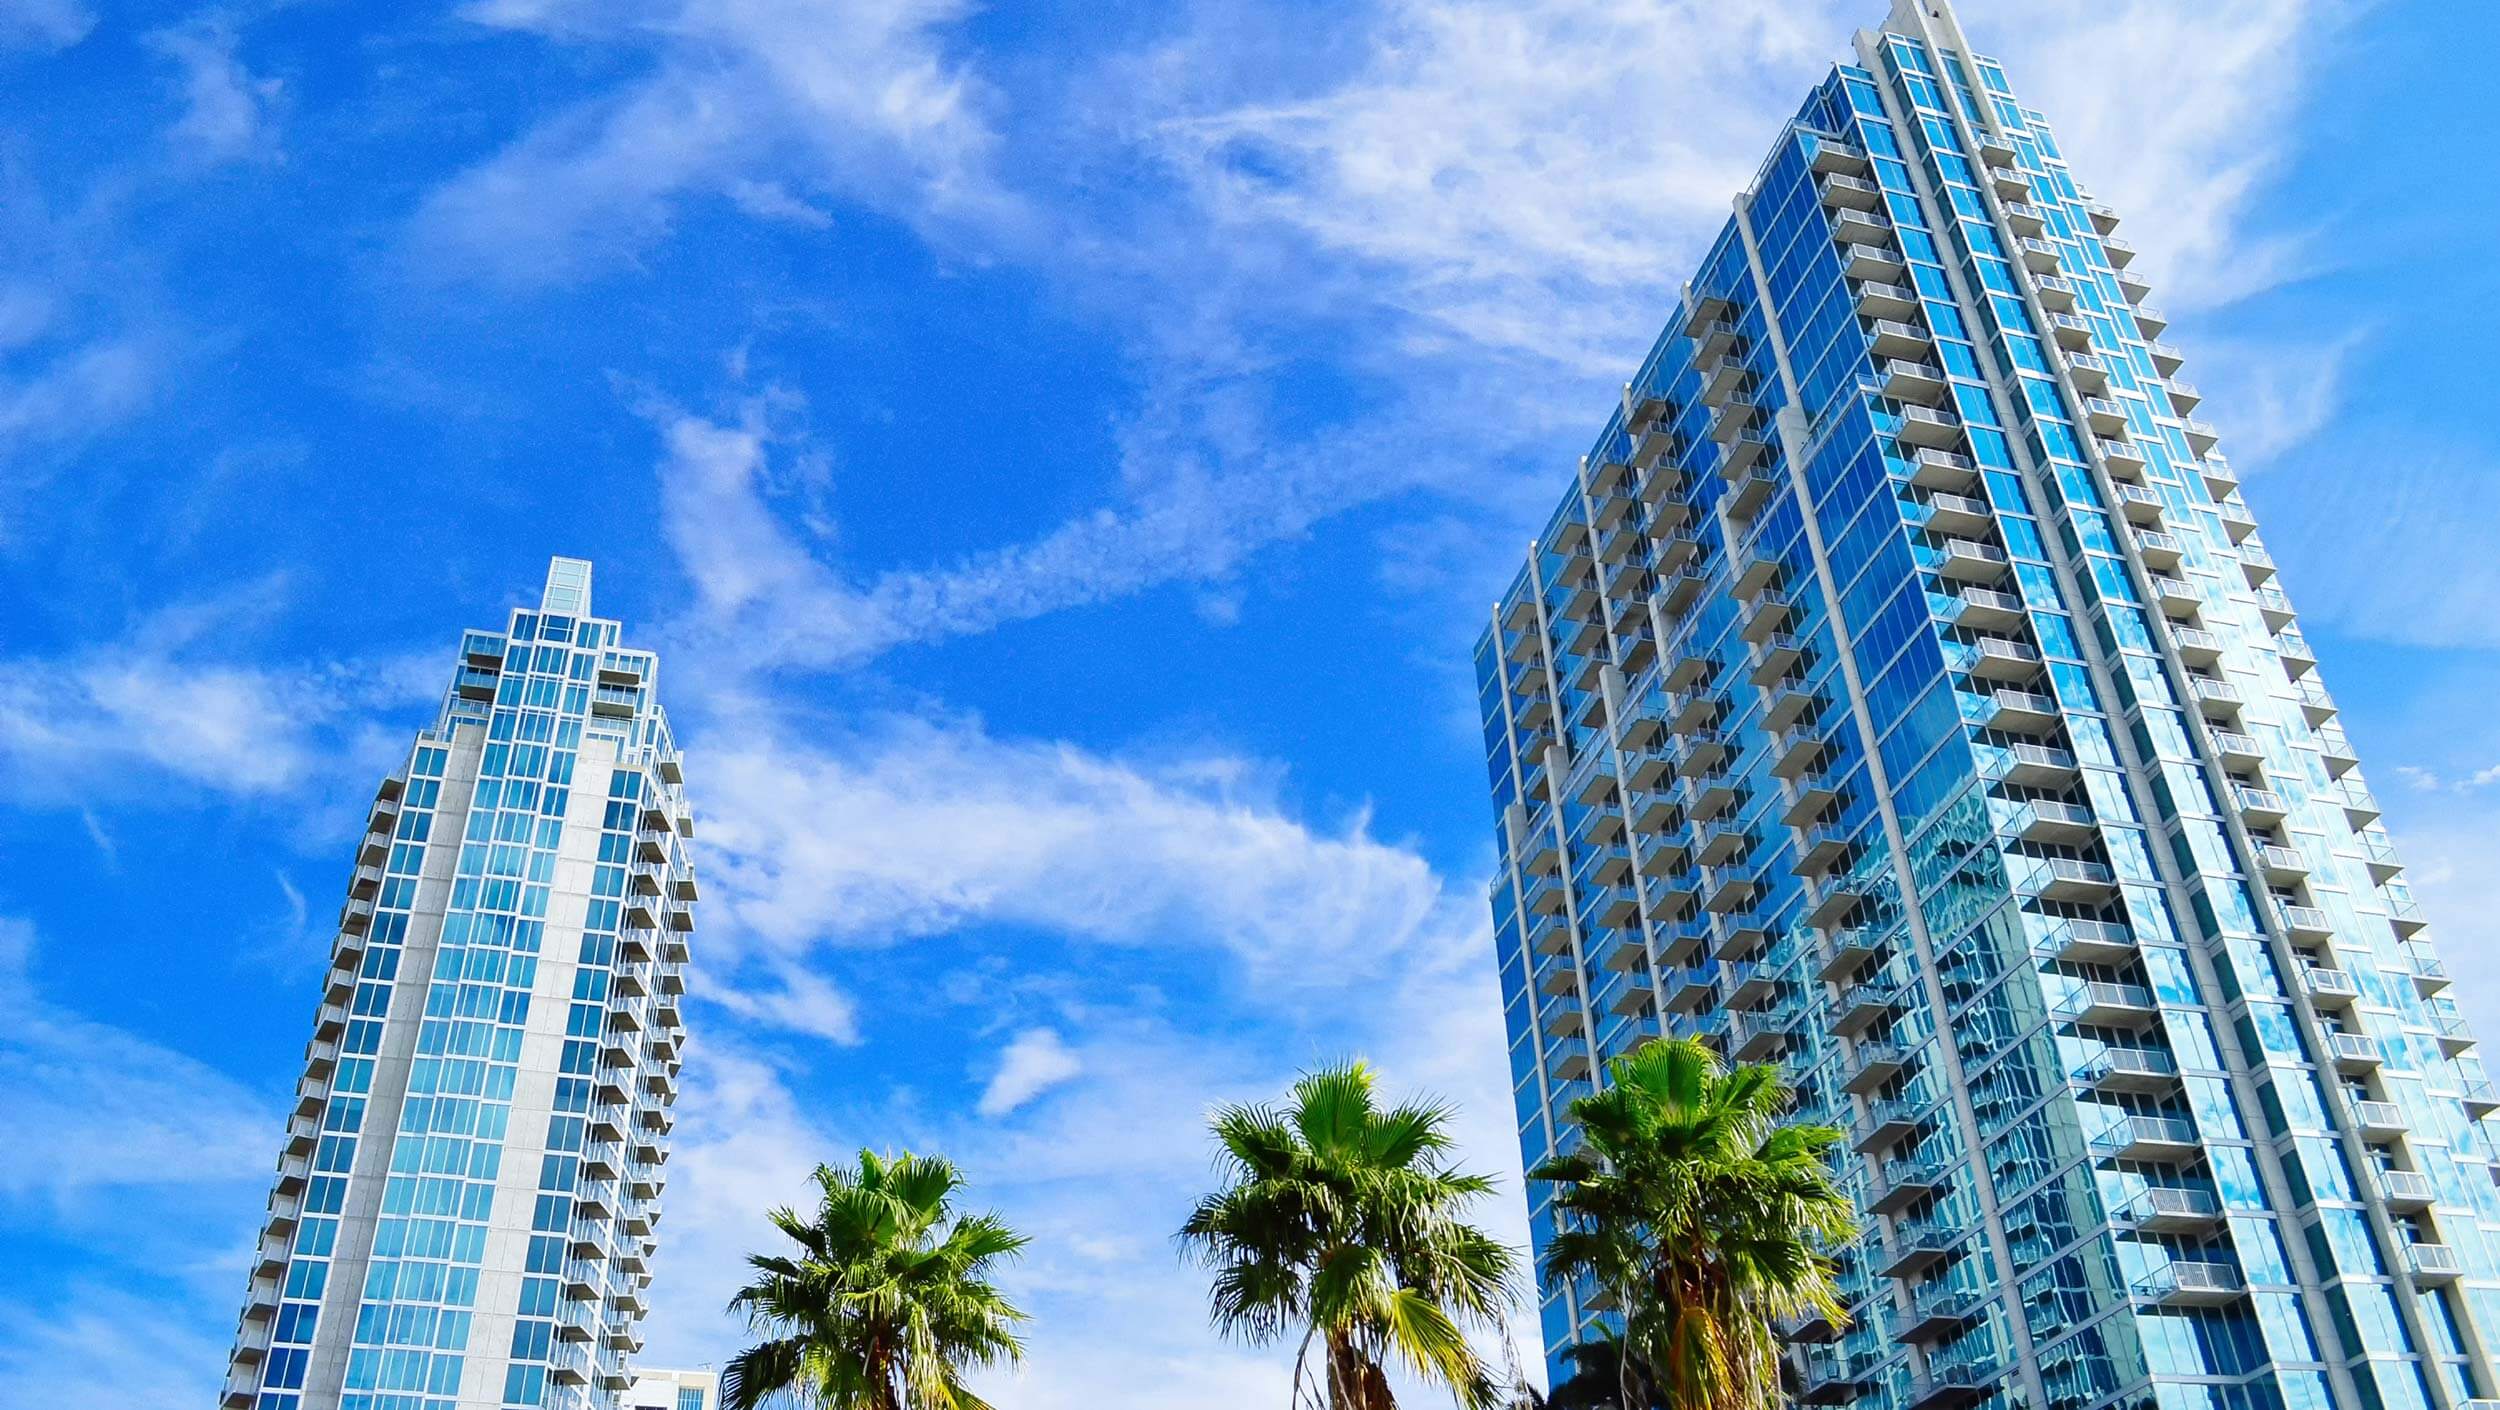 A large tall tower with a sky background in Florida